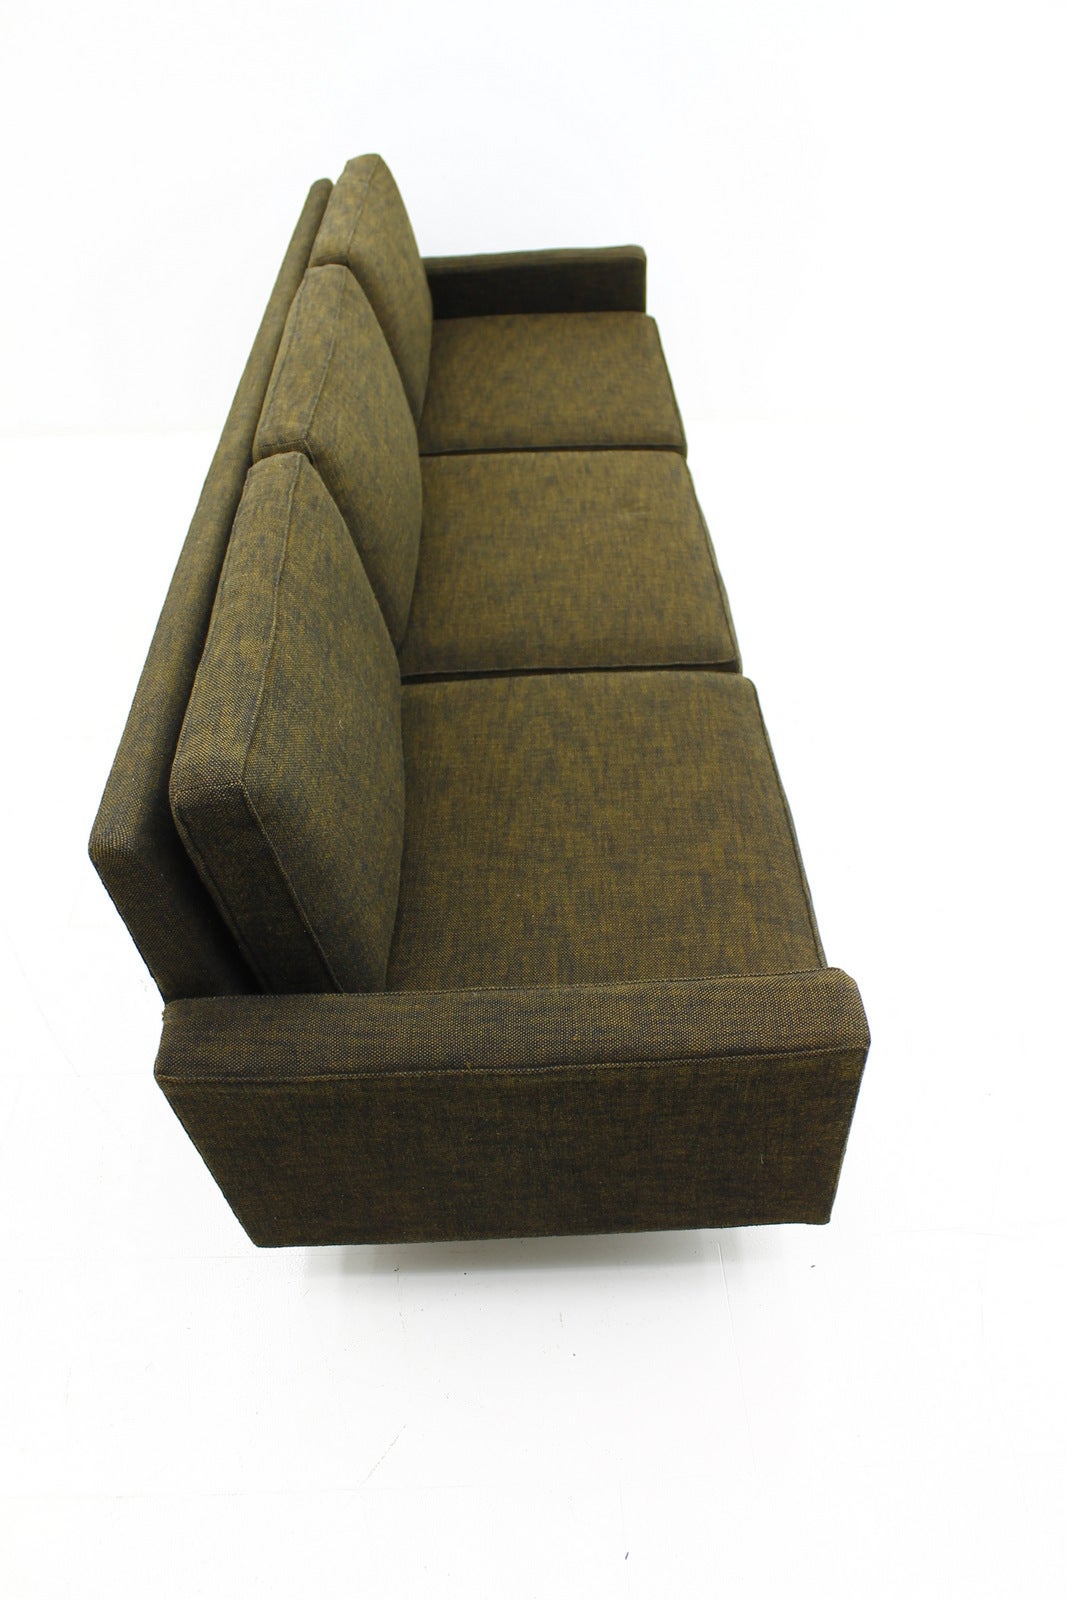 American Sofa by Florence Knoll, 1949